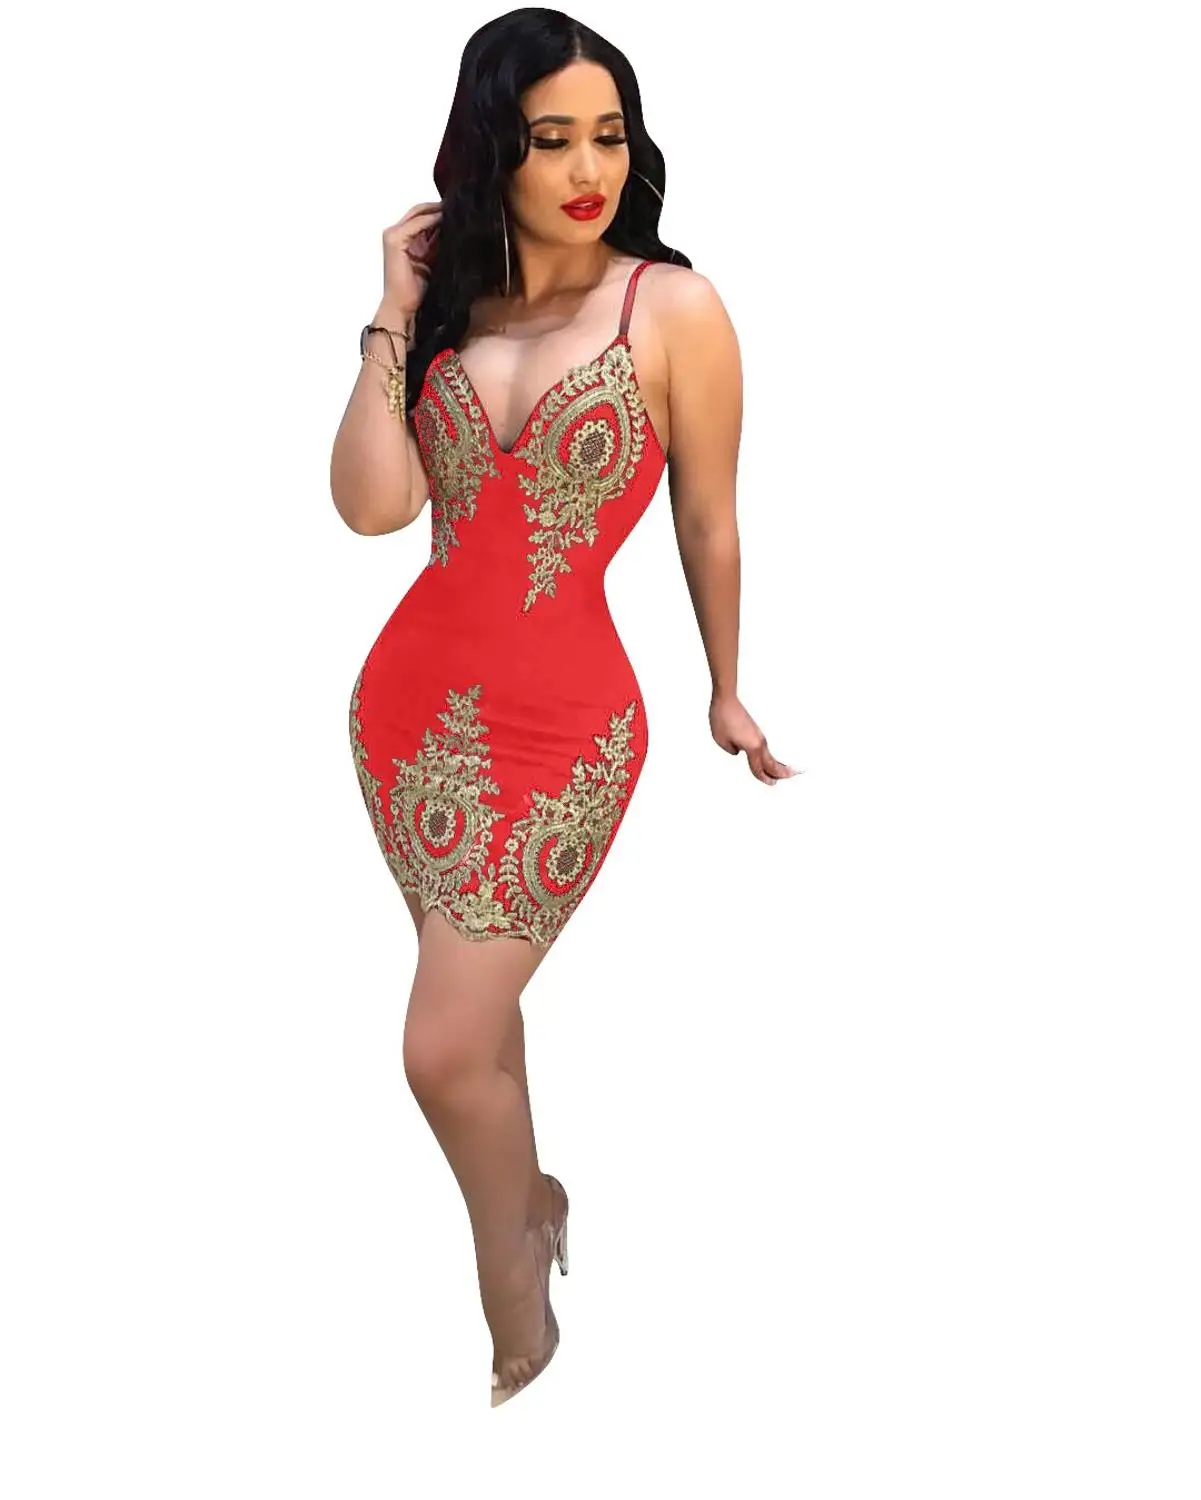 New Fashion Sexy Strapless Women Bandage Bodycon Desigual Dress Long Sleeve Embroidery Party Dresses party dresses Dresses